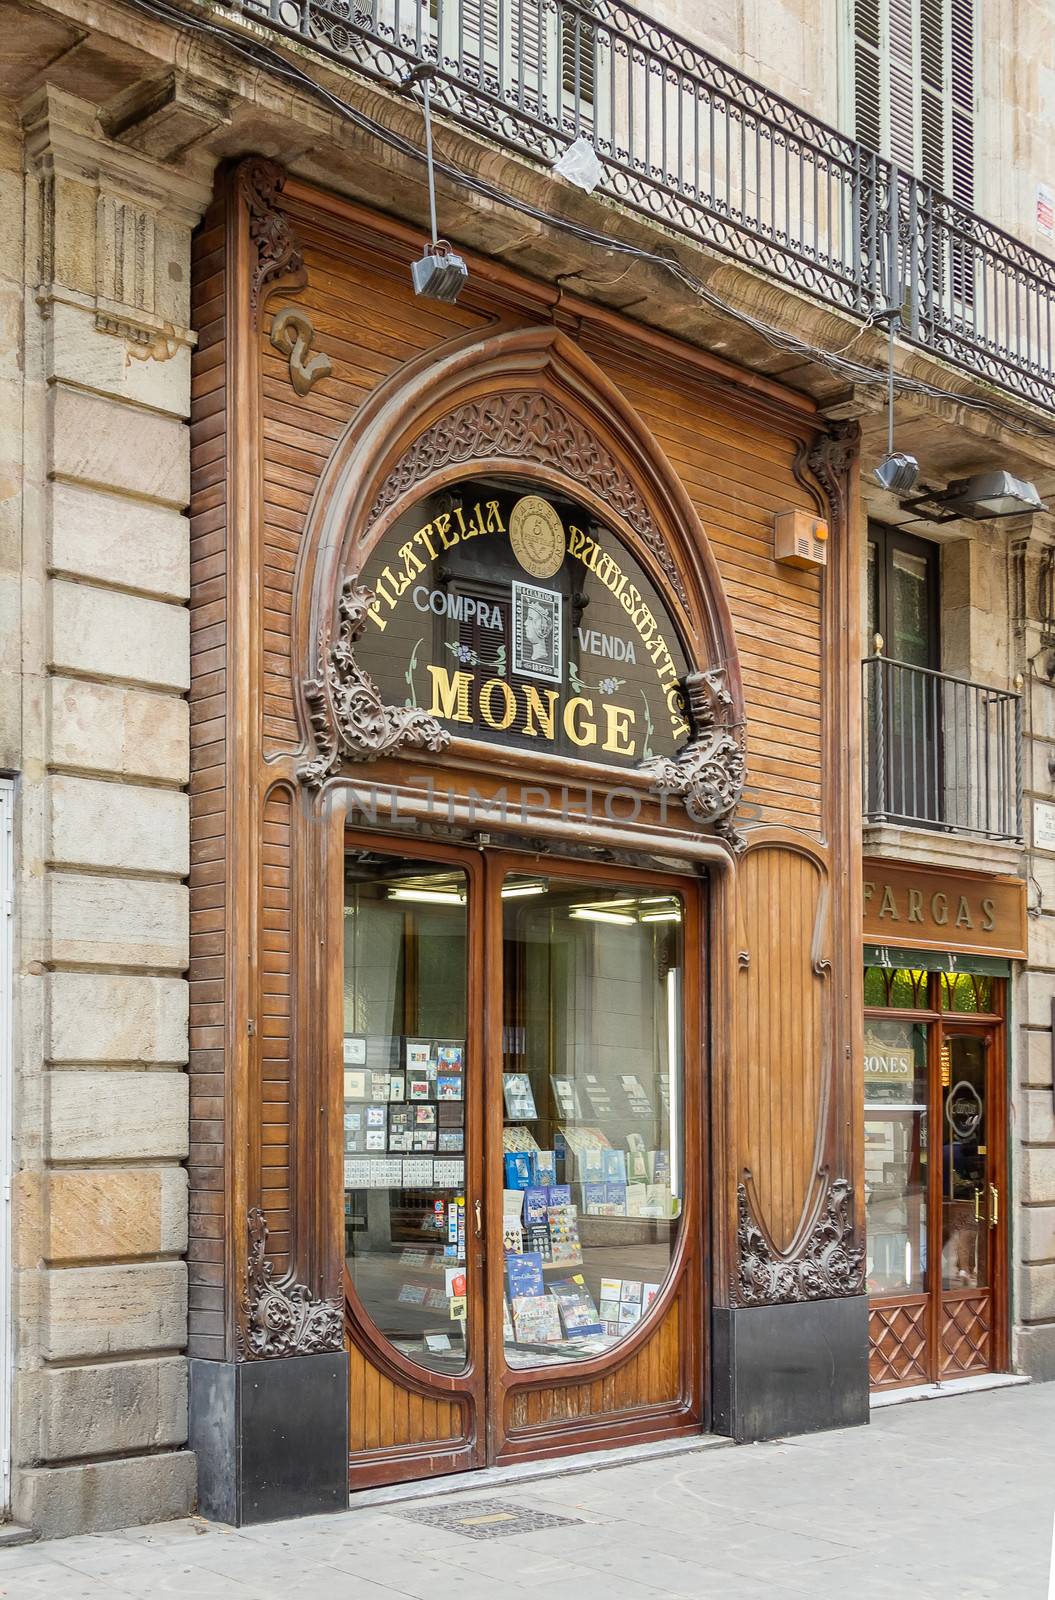 BARCELONA, SPAIN - MAY 31 Famous modernist facade of traditional philately shop, in Barcelona, Spain, on May 31, 2013